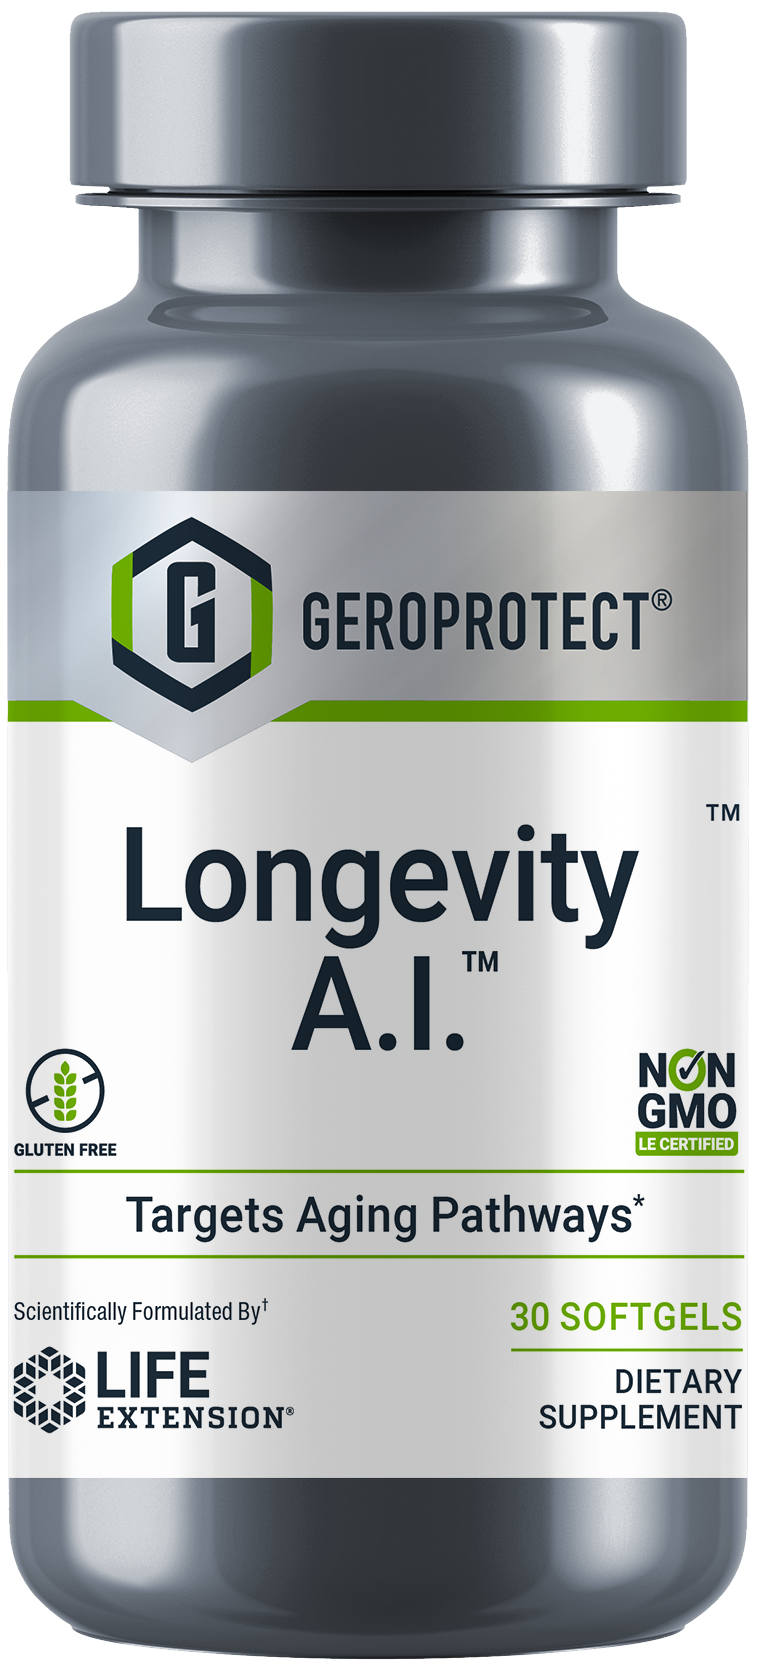 GEROPROTECT® Longevity A.I. 30 soft gels by Life Extension